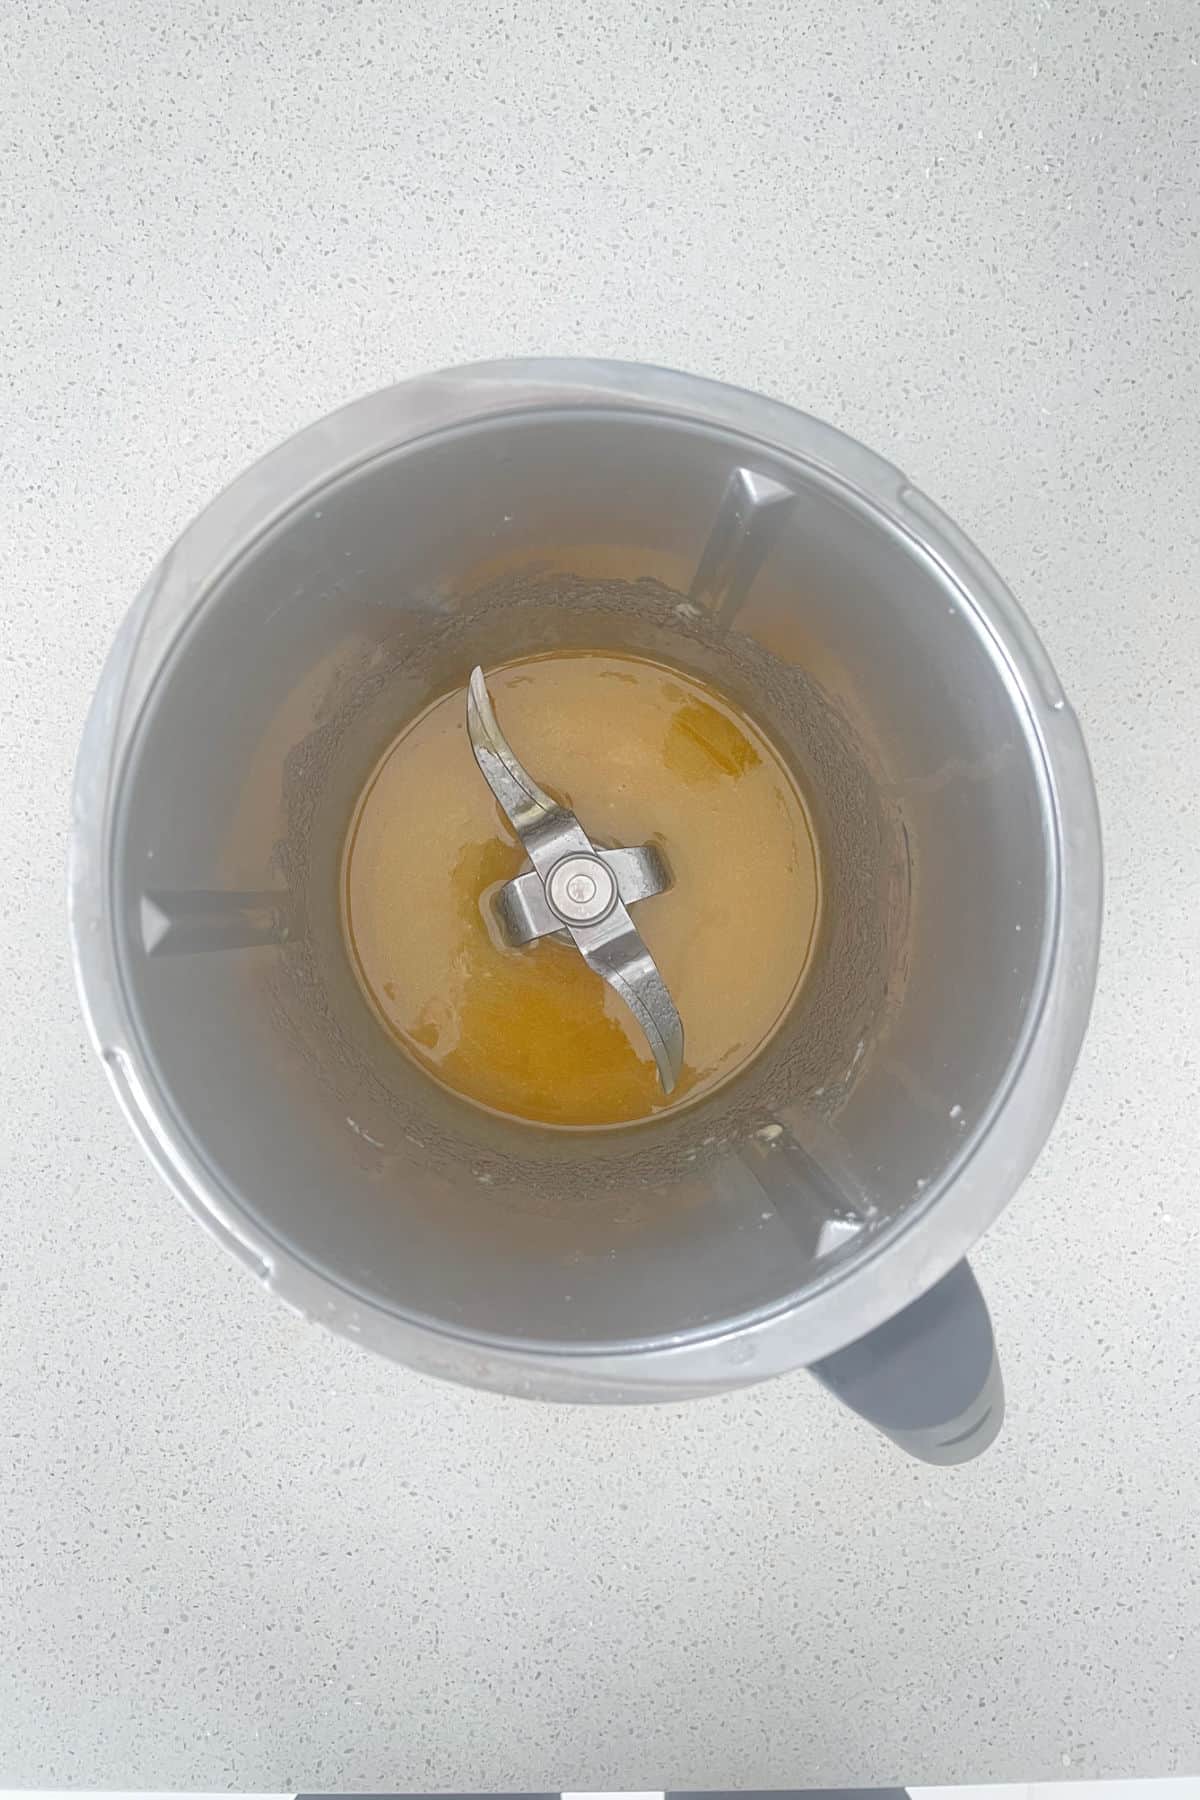 Melted butter, sugar and honey in a thermomix bowl.